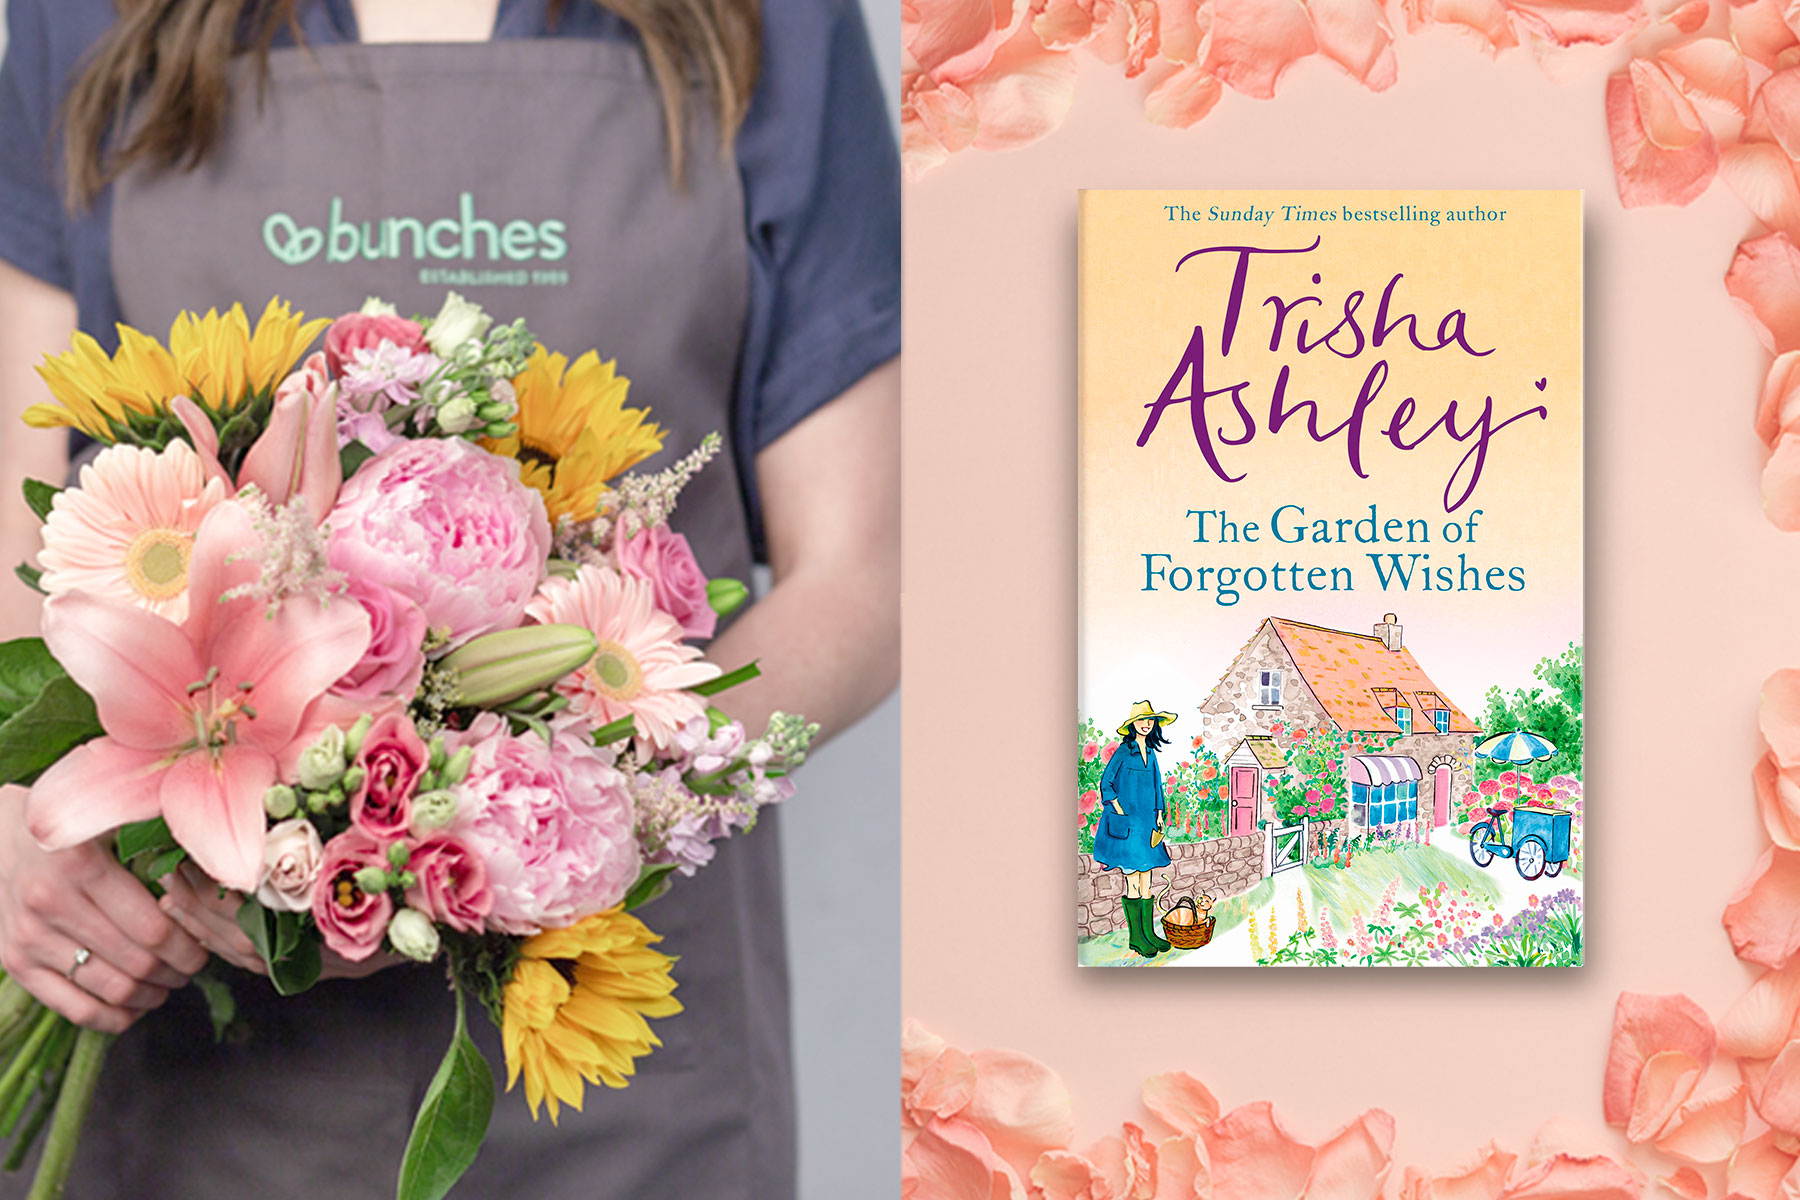 Win three months of flowers from Bunches with Trisha Ashley